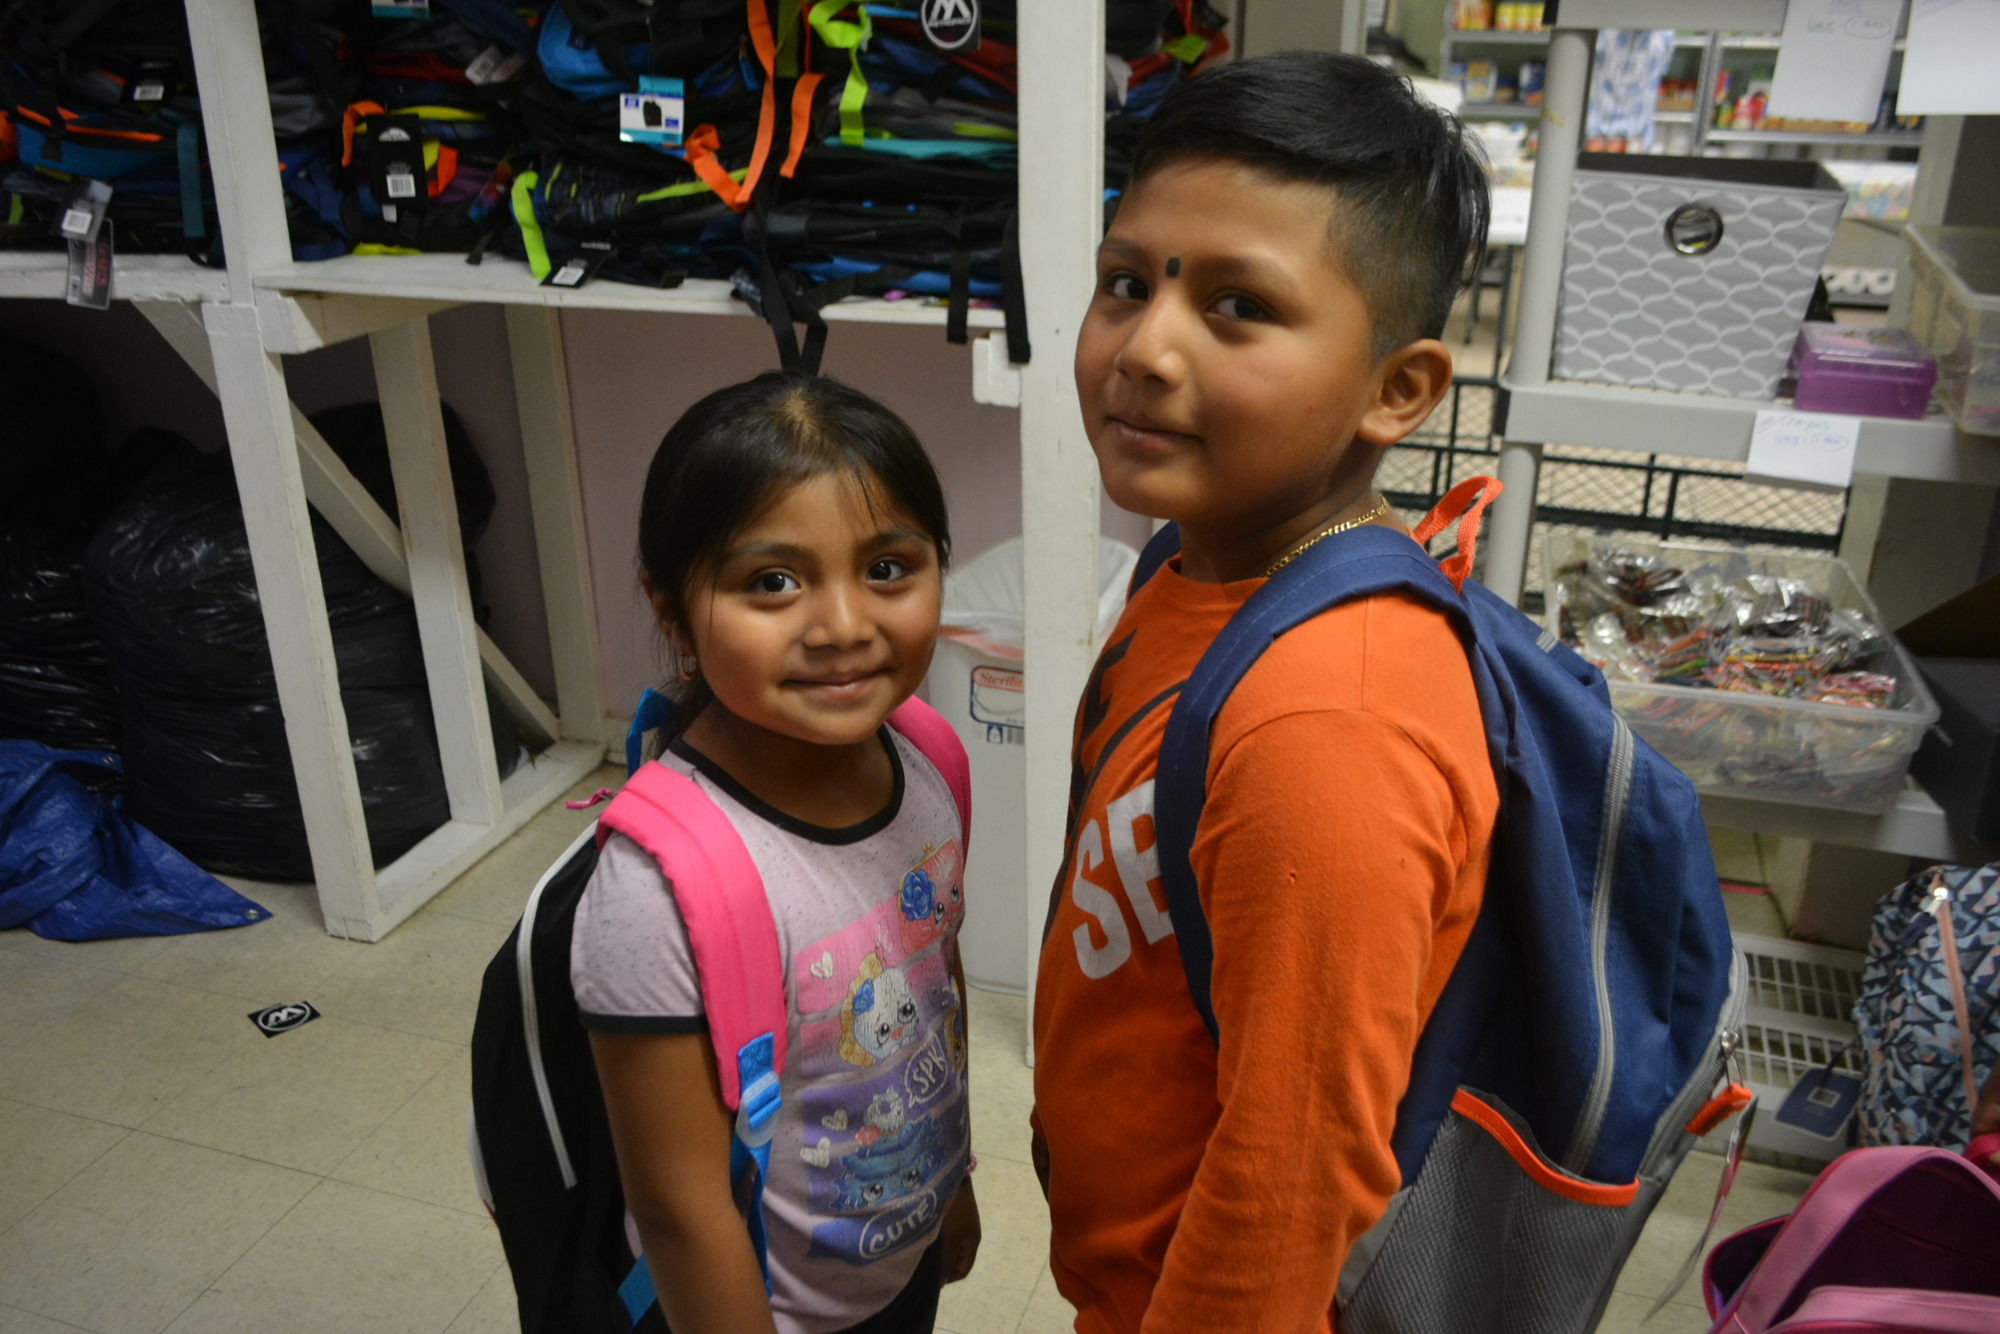 Six-year-old Sheila Perez and her brother, 8-year-old Yovani Perez, show off the backpacks they picked up at the Stillpoint House of Prayer on Monday.